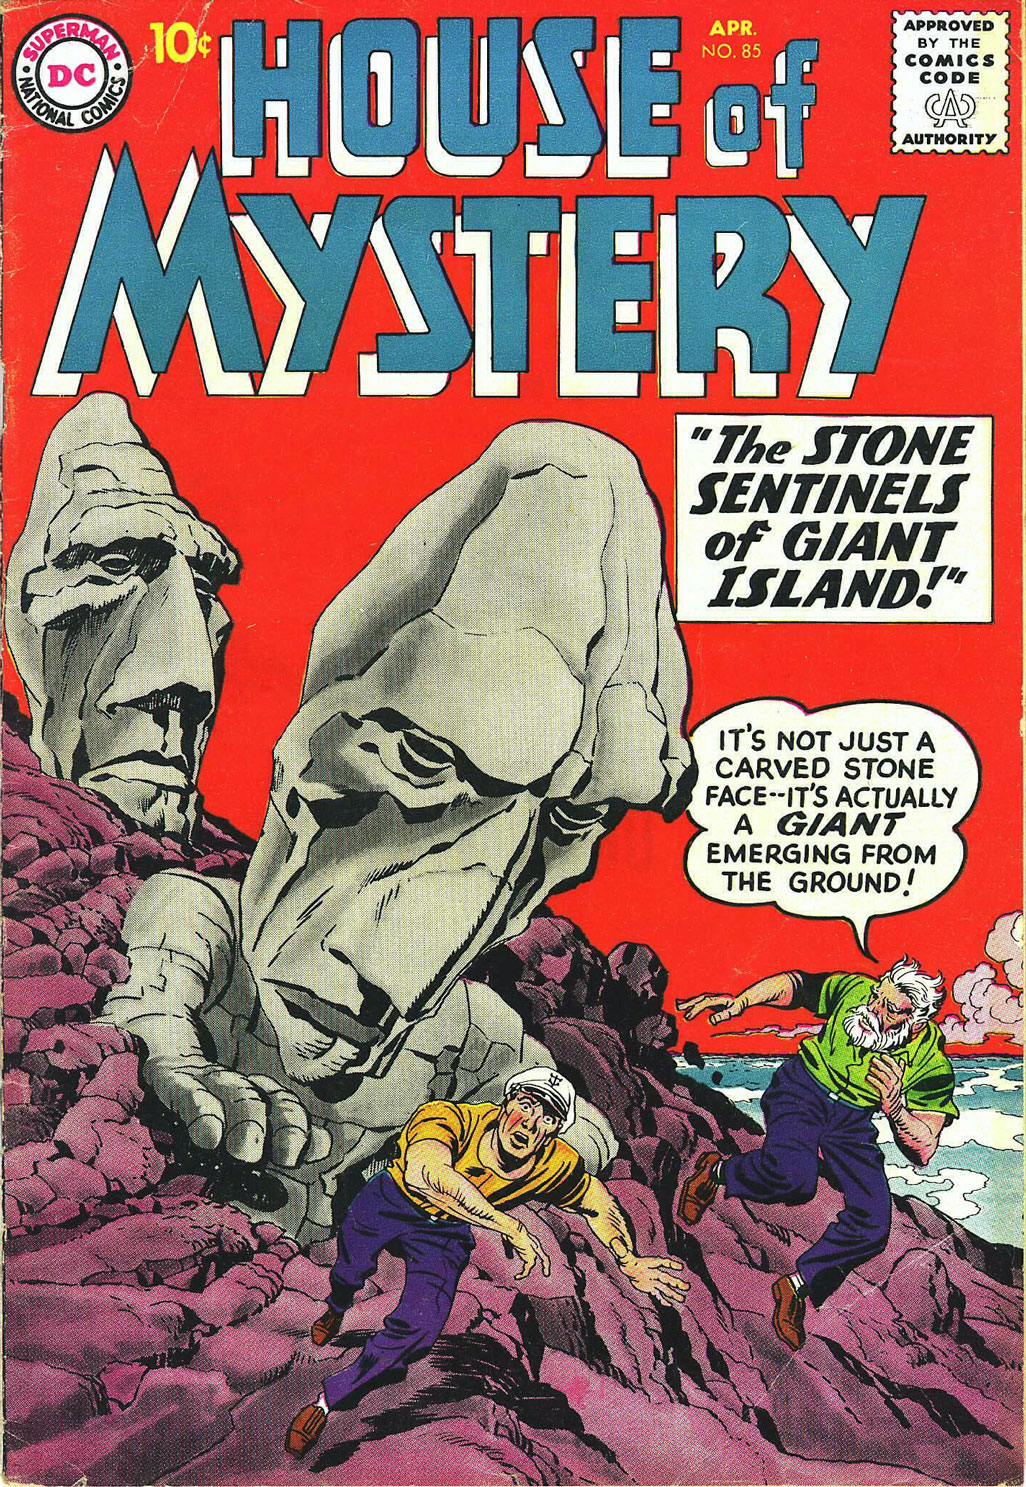 Stone Sentinel. Hammer House of Mystery and Suspense. Giants island